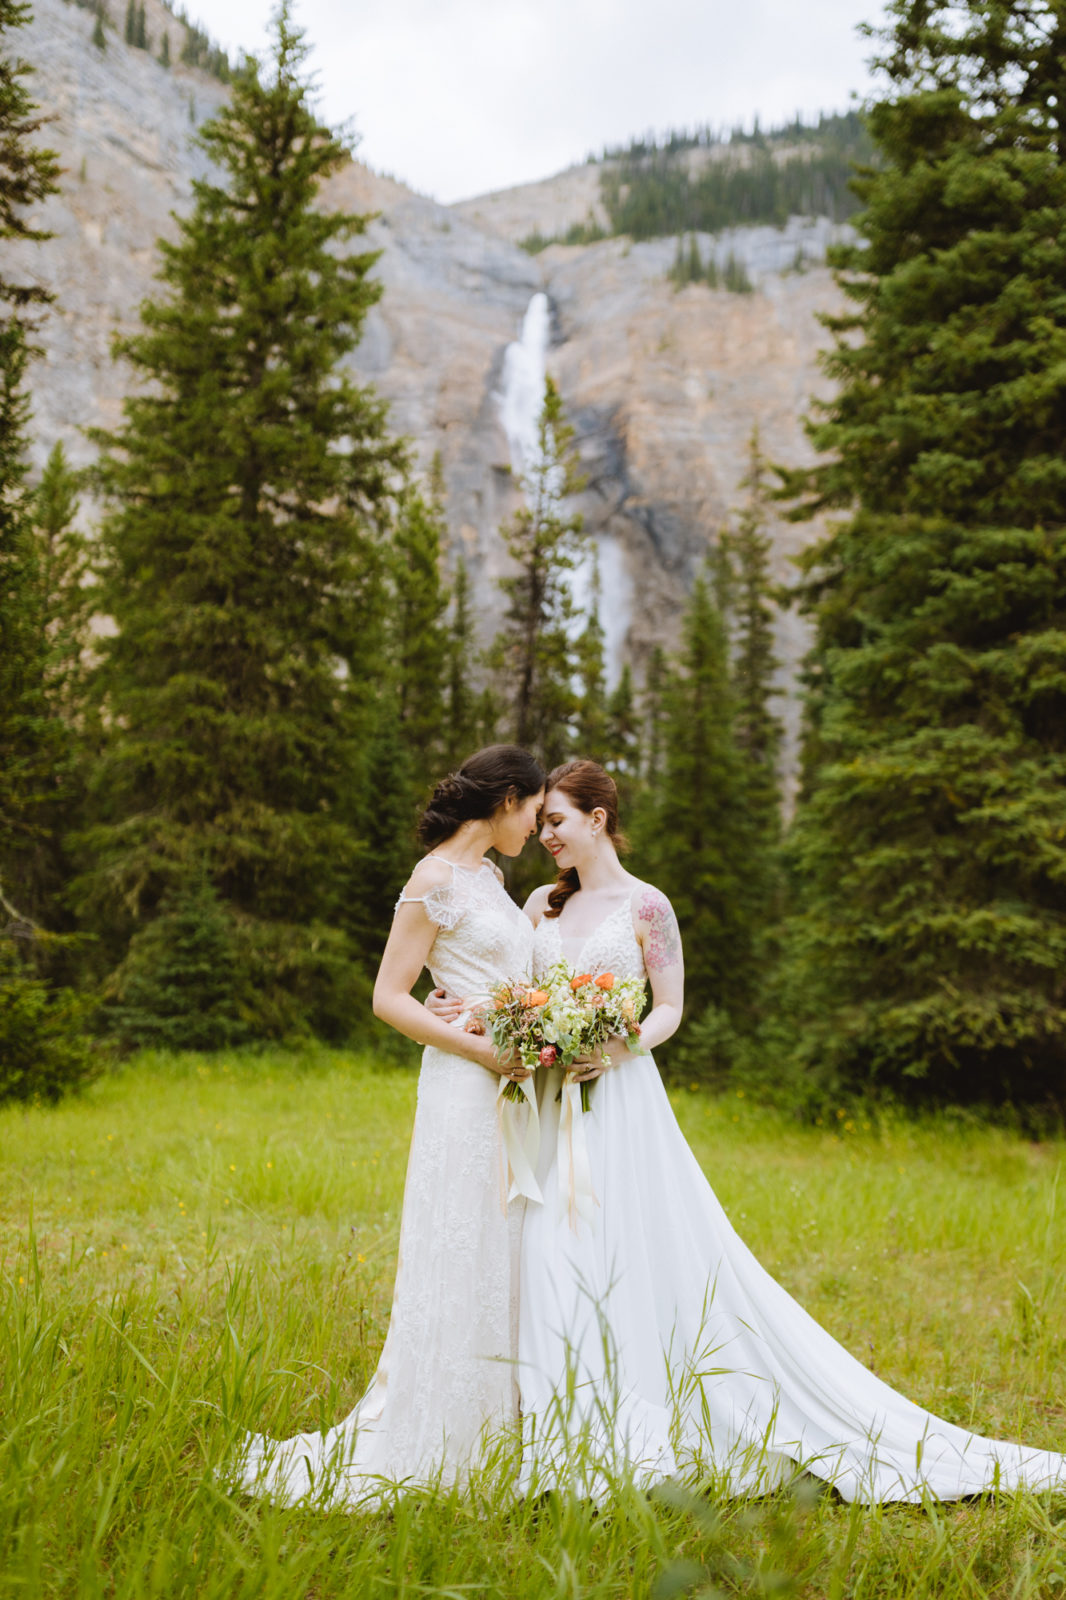 Newly weds pose in their wedding gowns in front of Takakkaw Falls for their Elopement in Yoho National Park